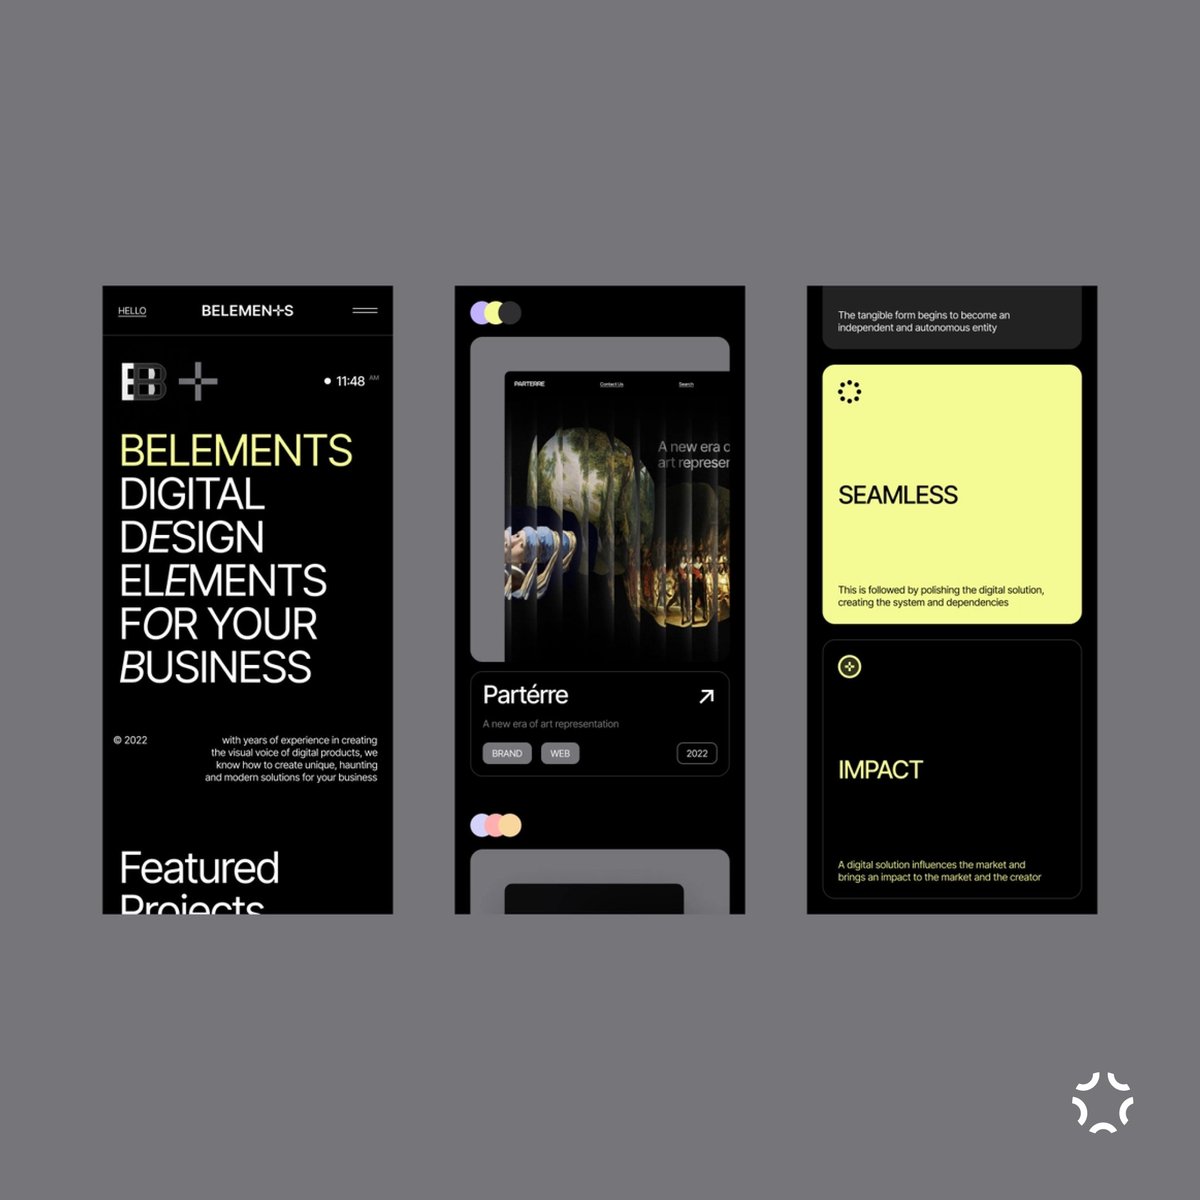 ⁣belements: web design, mobile, branding by ⁣belements

⁣⁣⁣This is how an easy-to-read design should look like🙂⠀⠀⠀⠀⠀⠀⠀⠀⠀⠀
⠀⠀⠀⠀⠀⠀⠀⠀⠀⠀
#design #figma #appdesigner #appdesign #figmadesign #figmagram #inspiration #liketime #ui #uidesign #ux #uitrends ⠀